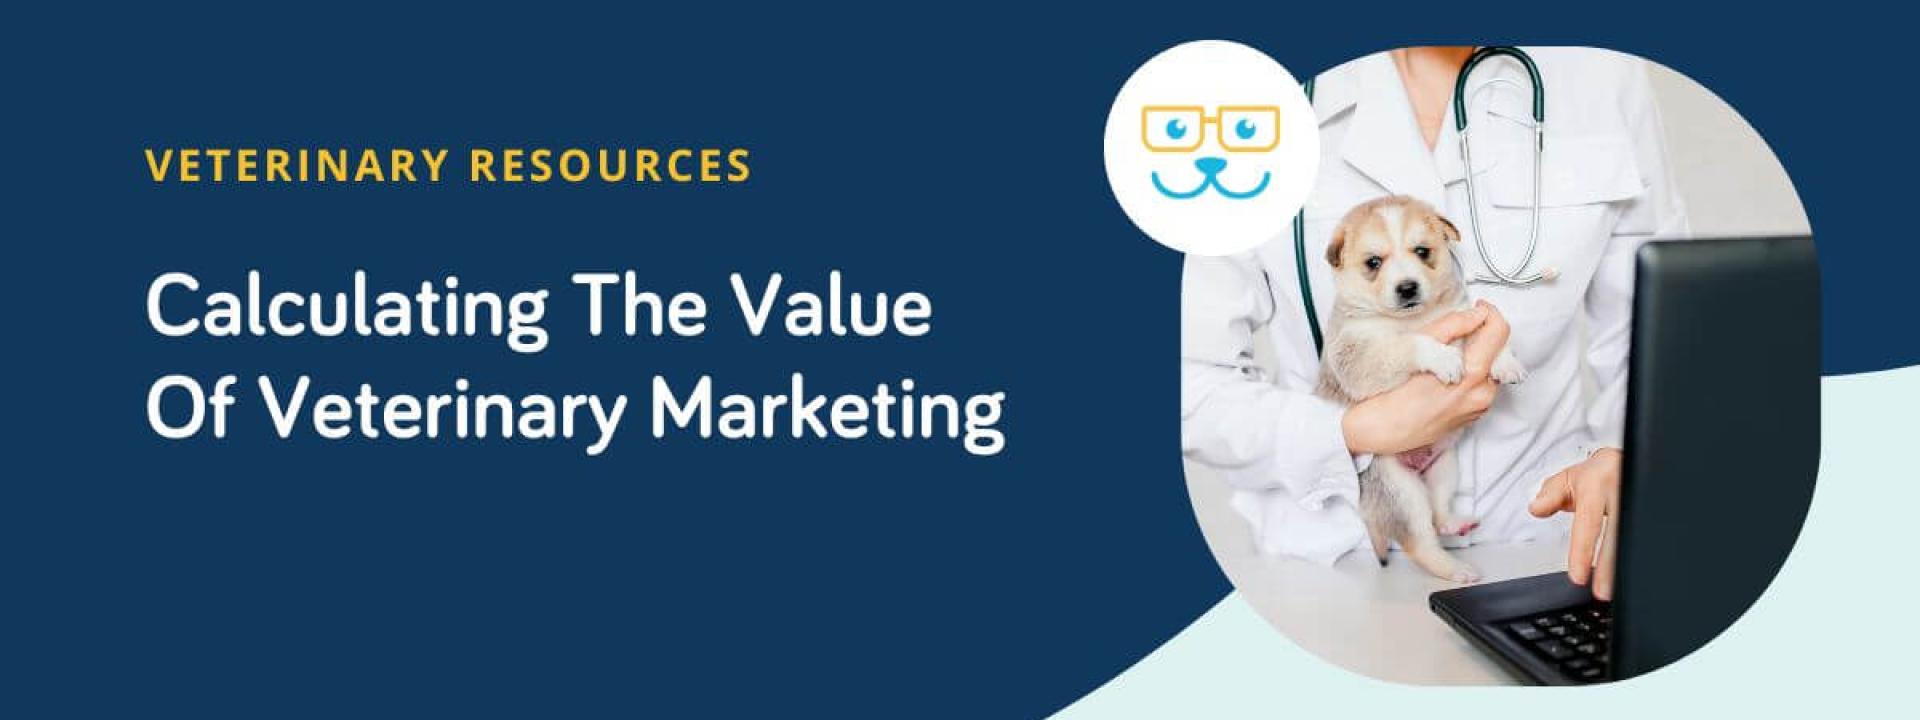 Calculating The Value Of Veterinary Marketing